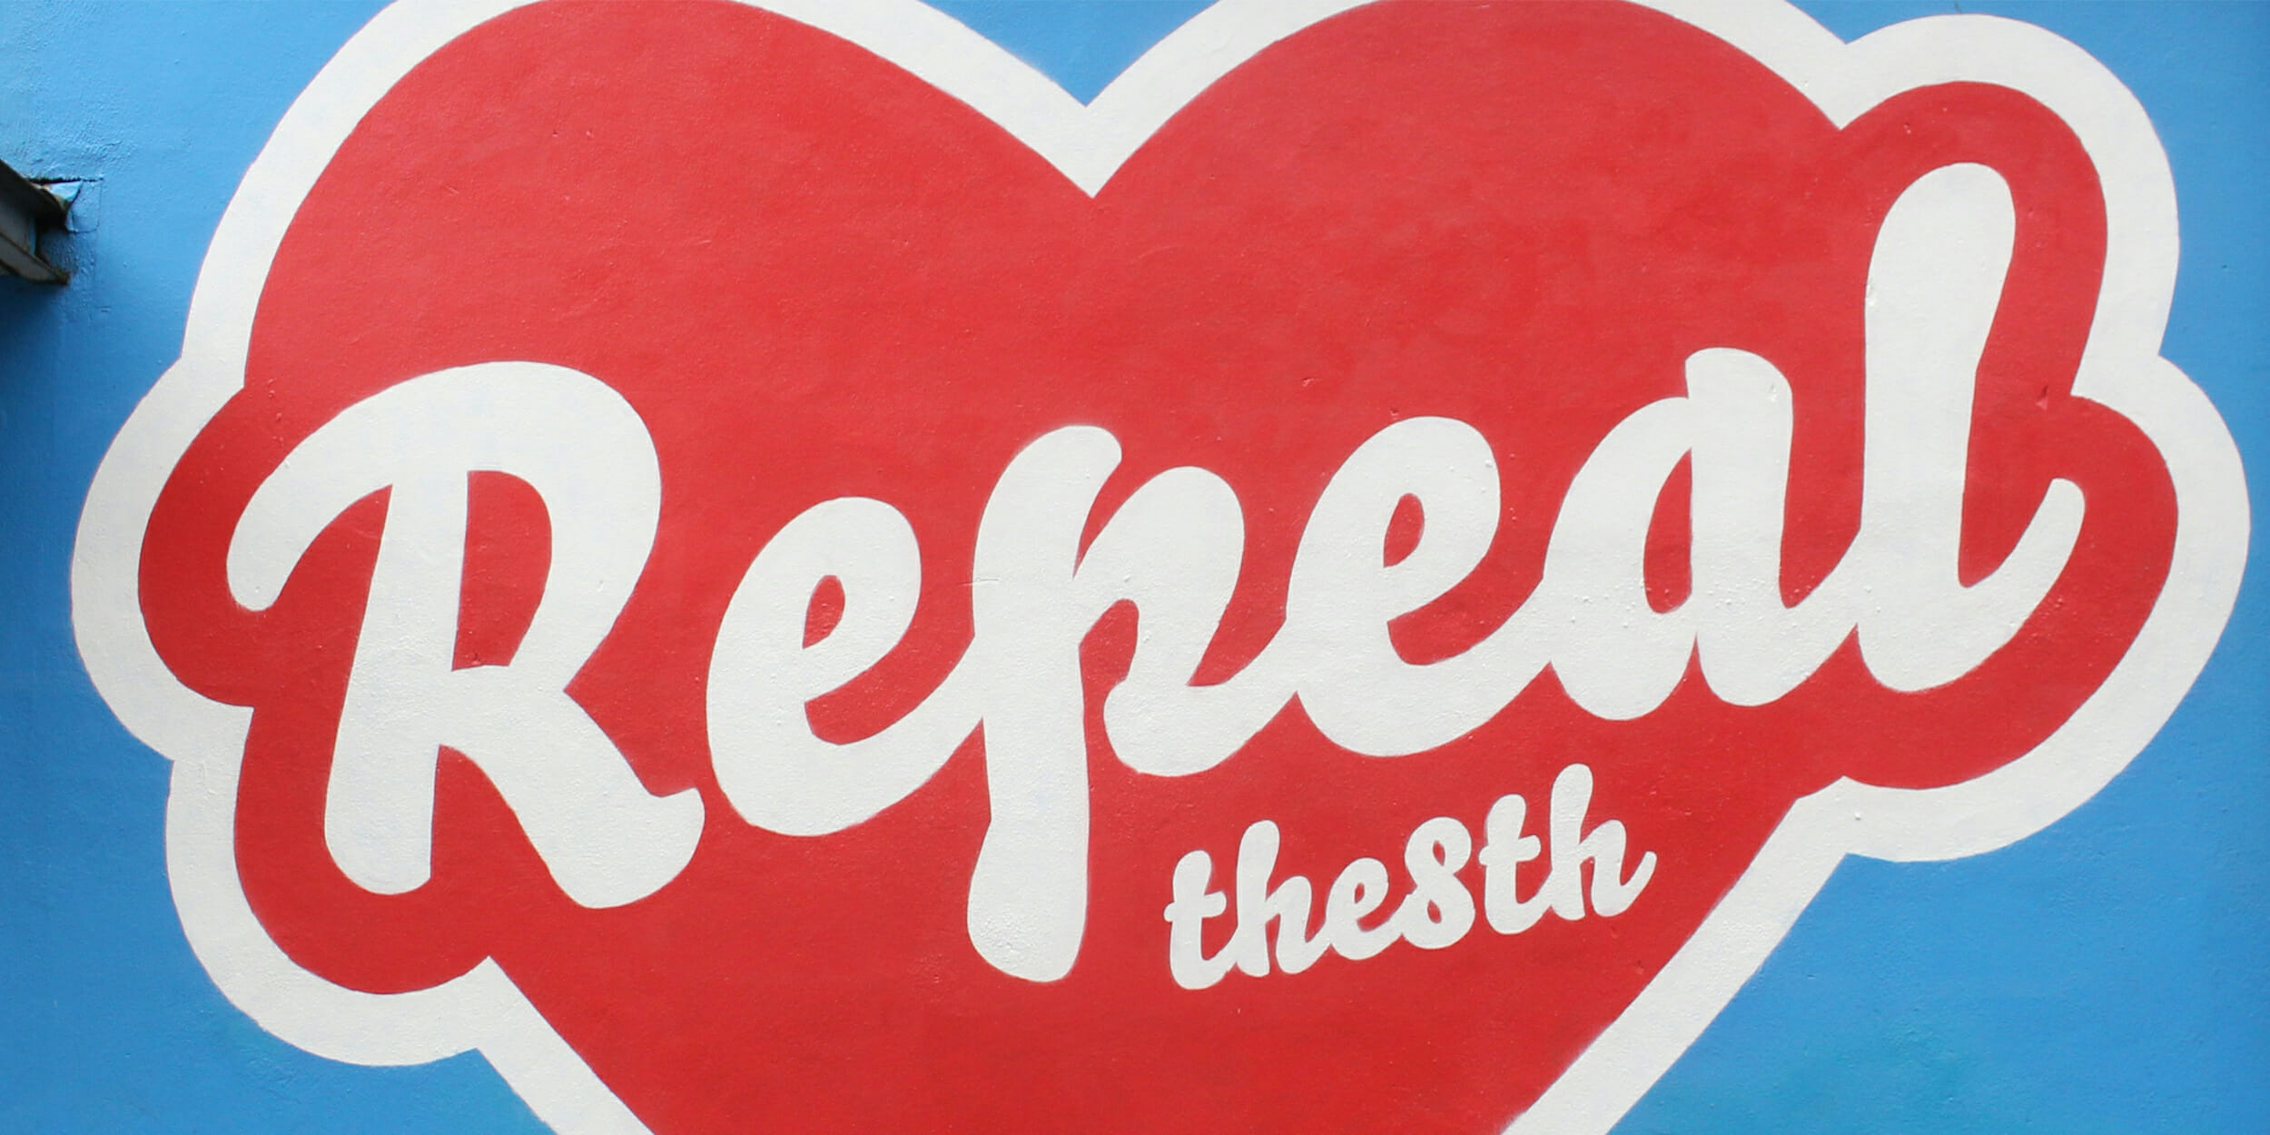 repeal the 8th mural on wall